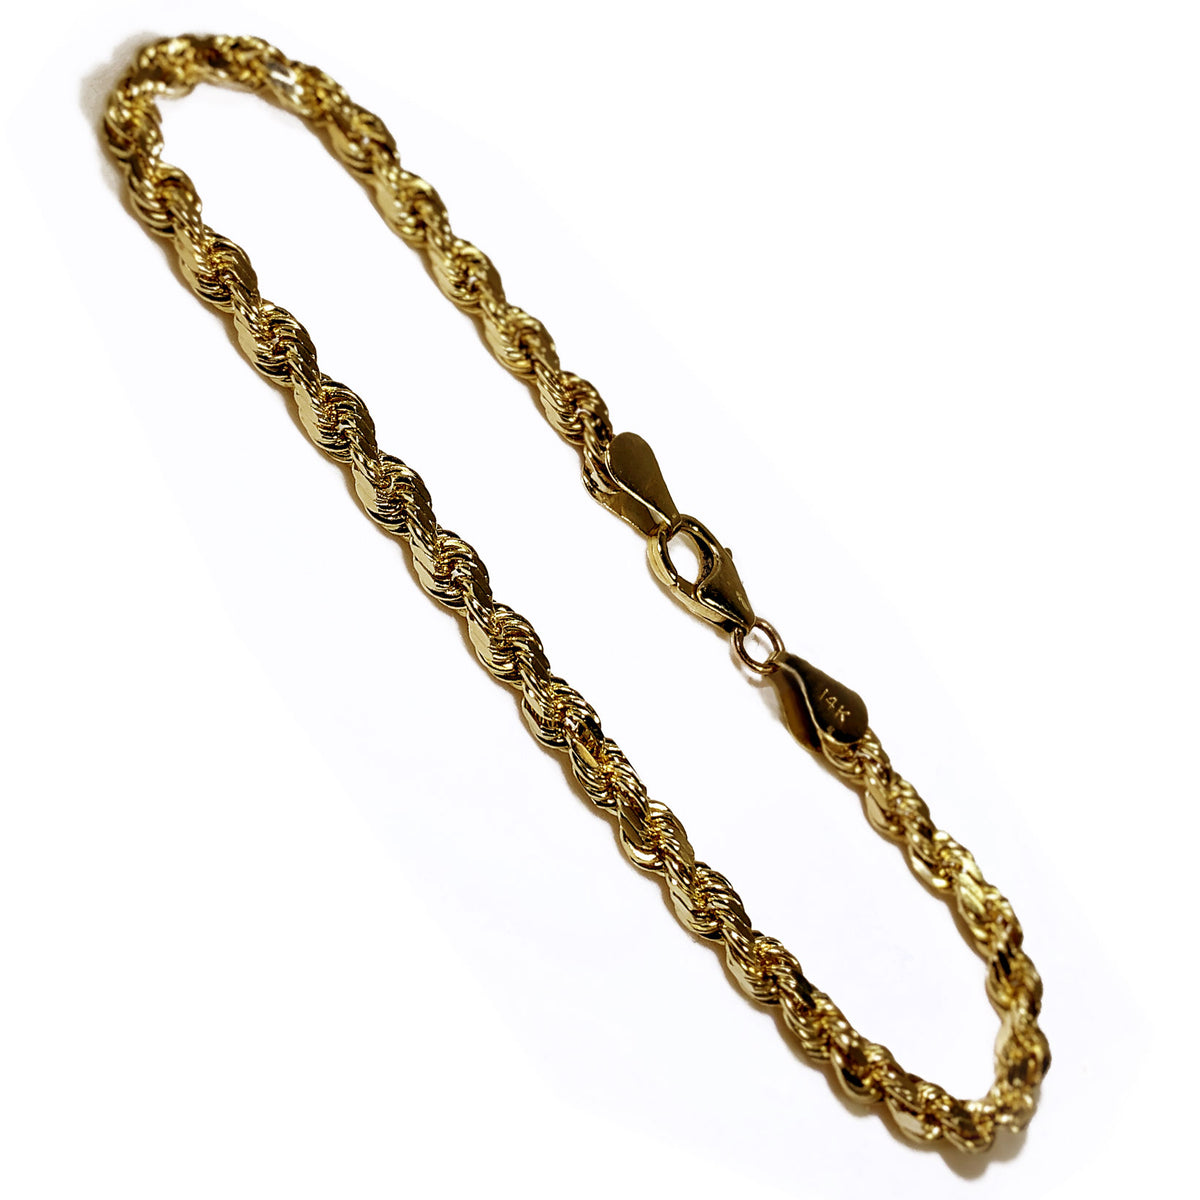 10K Yellow Gold Men’s Fancy Rope Style Bracelet 7″ Inches